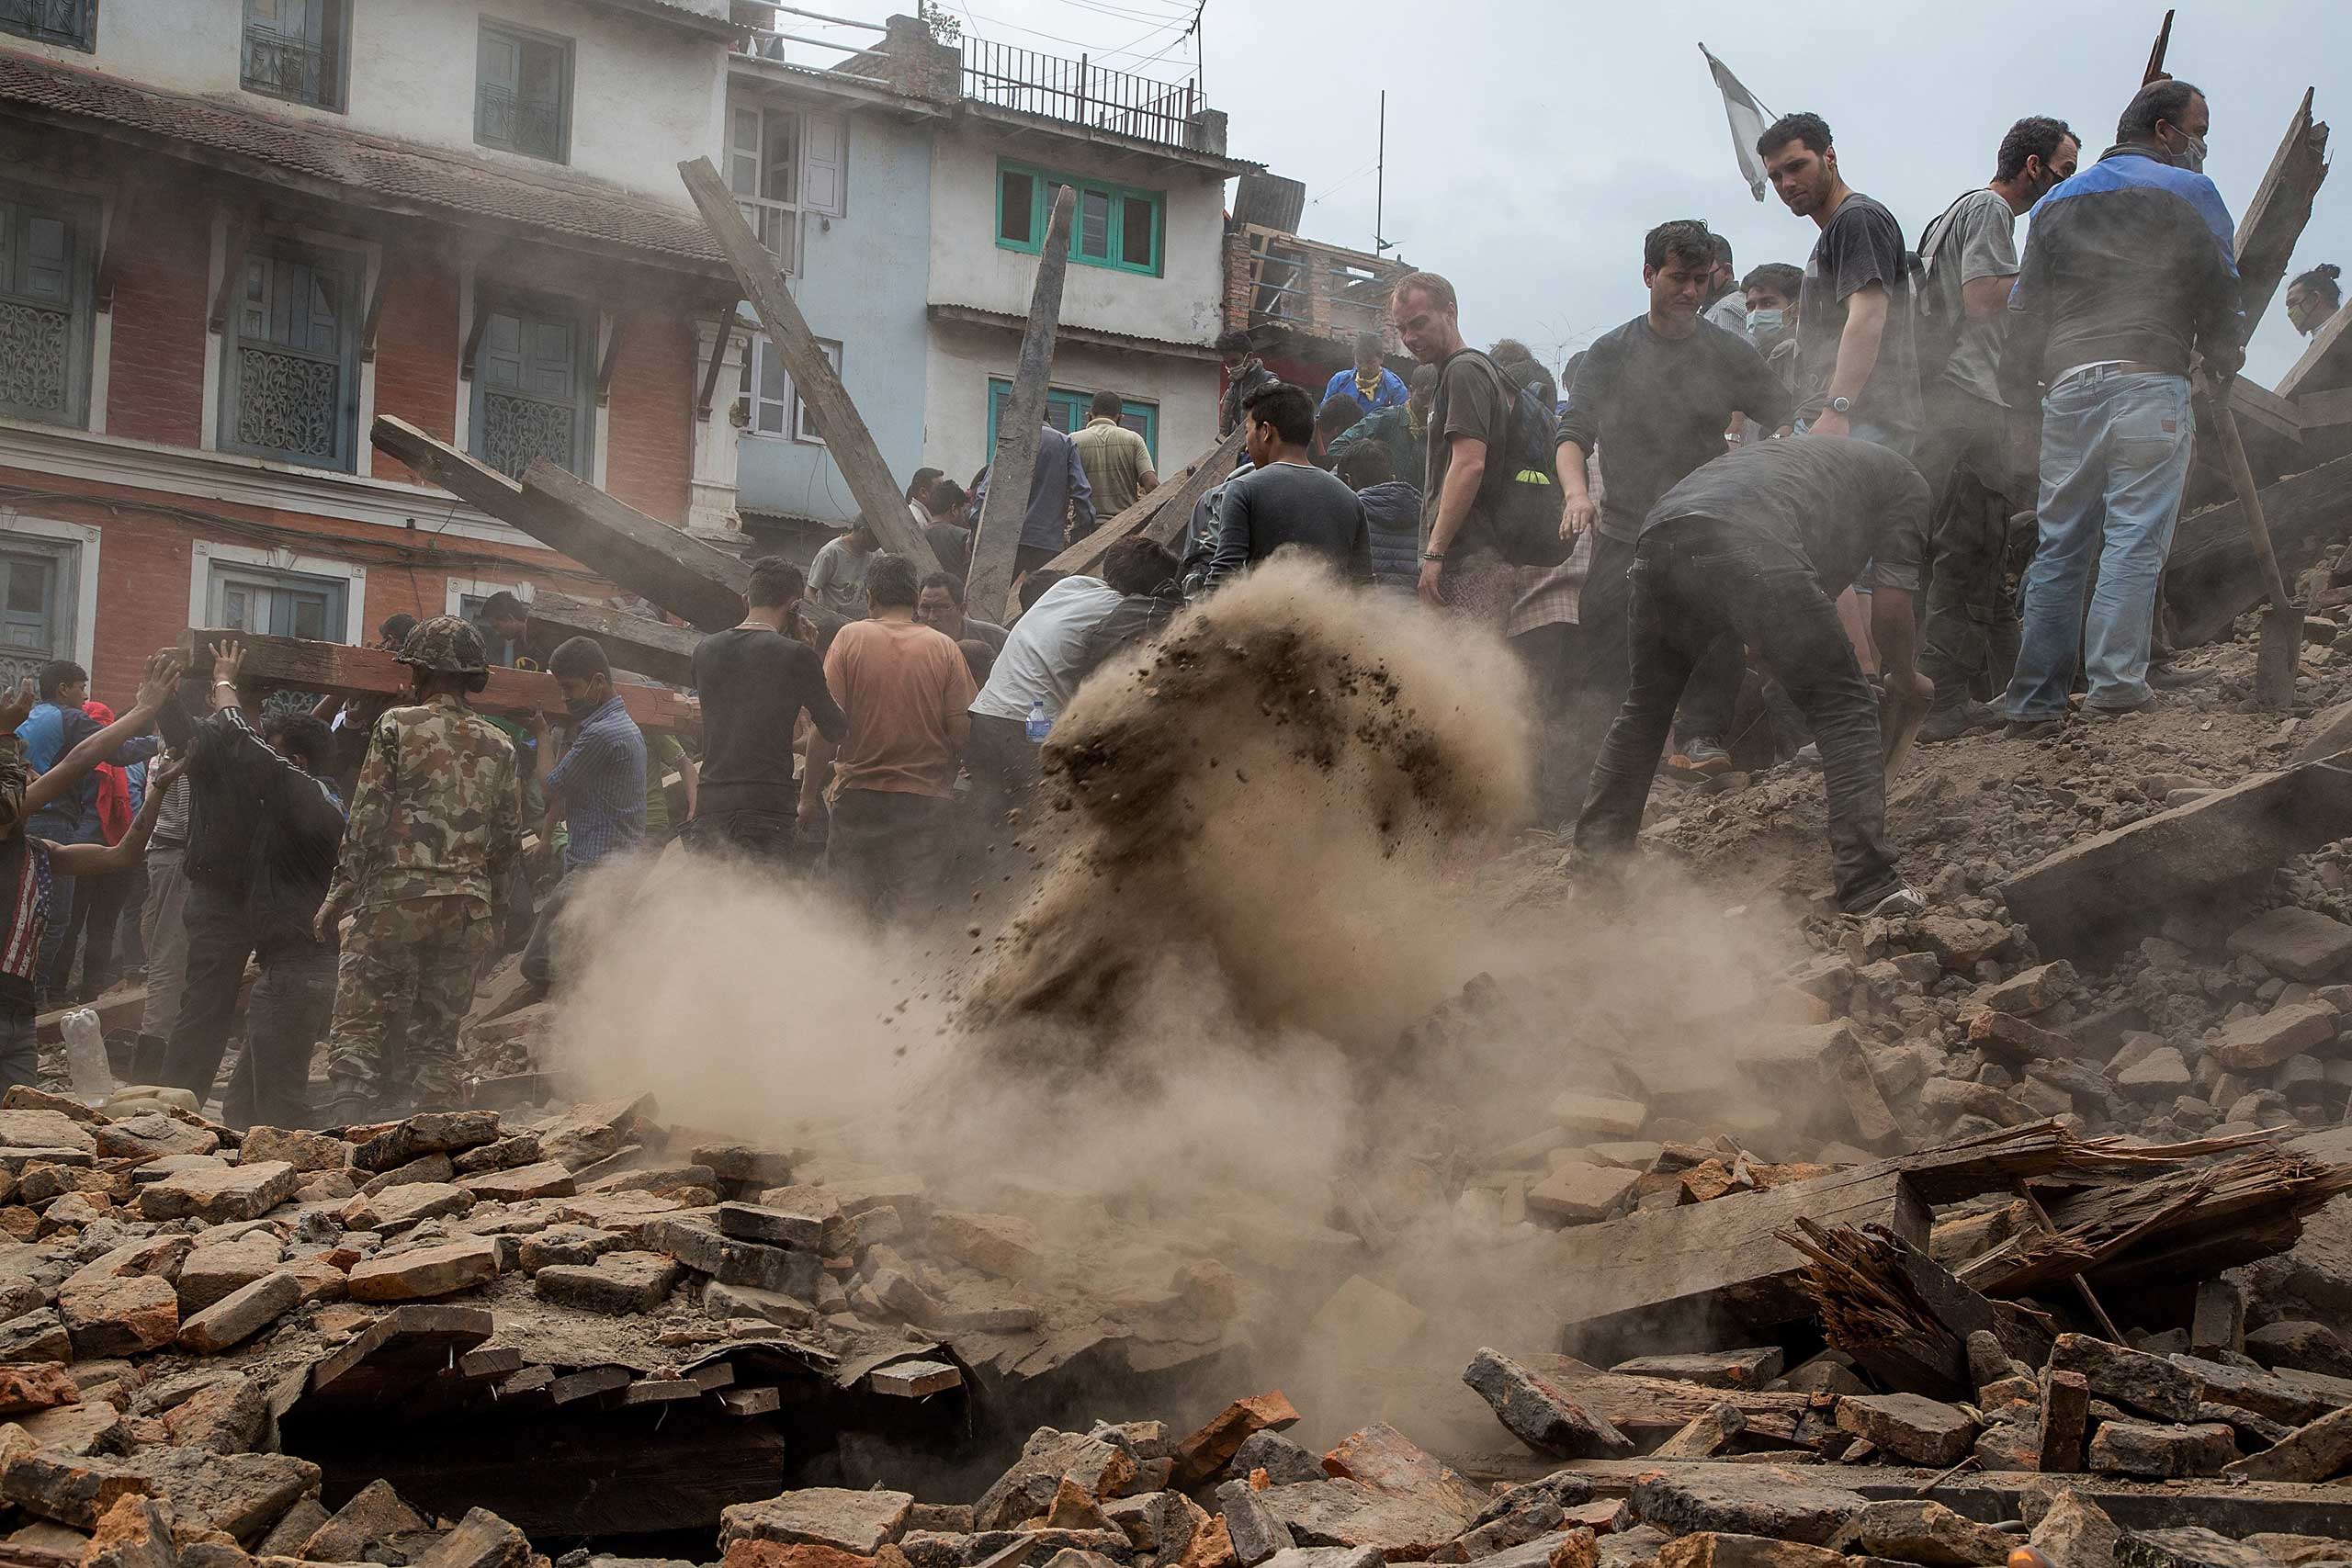 Emergency workers and bystanders clear debris while searching for survivors under a collapsed temple in Basantapur Durbar Square following an earthquake in Kathmandu on April 25, 2015.